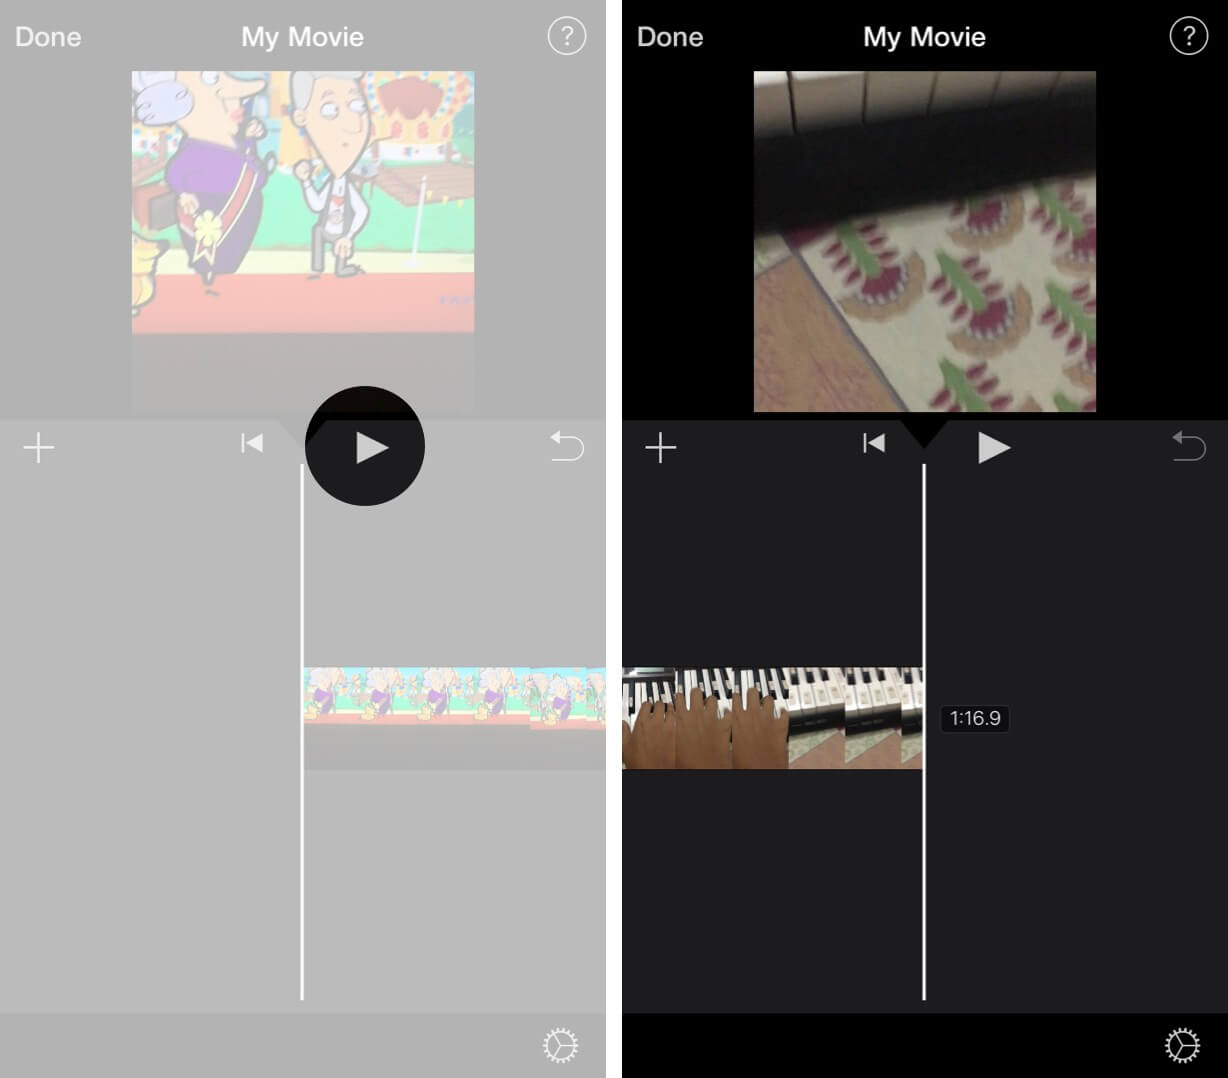 Tap on Play to Start Videos in iMovie on iPhone